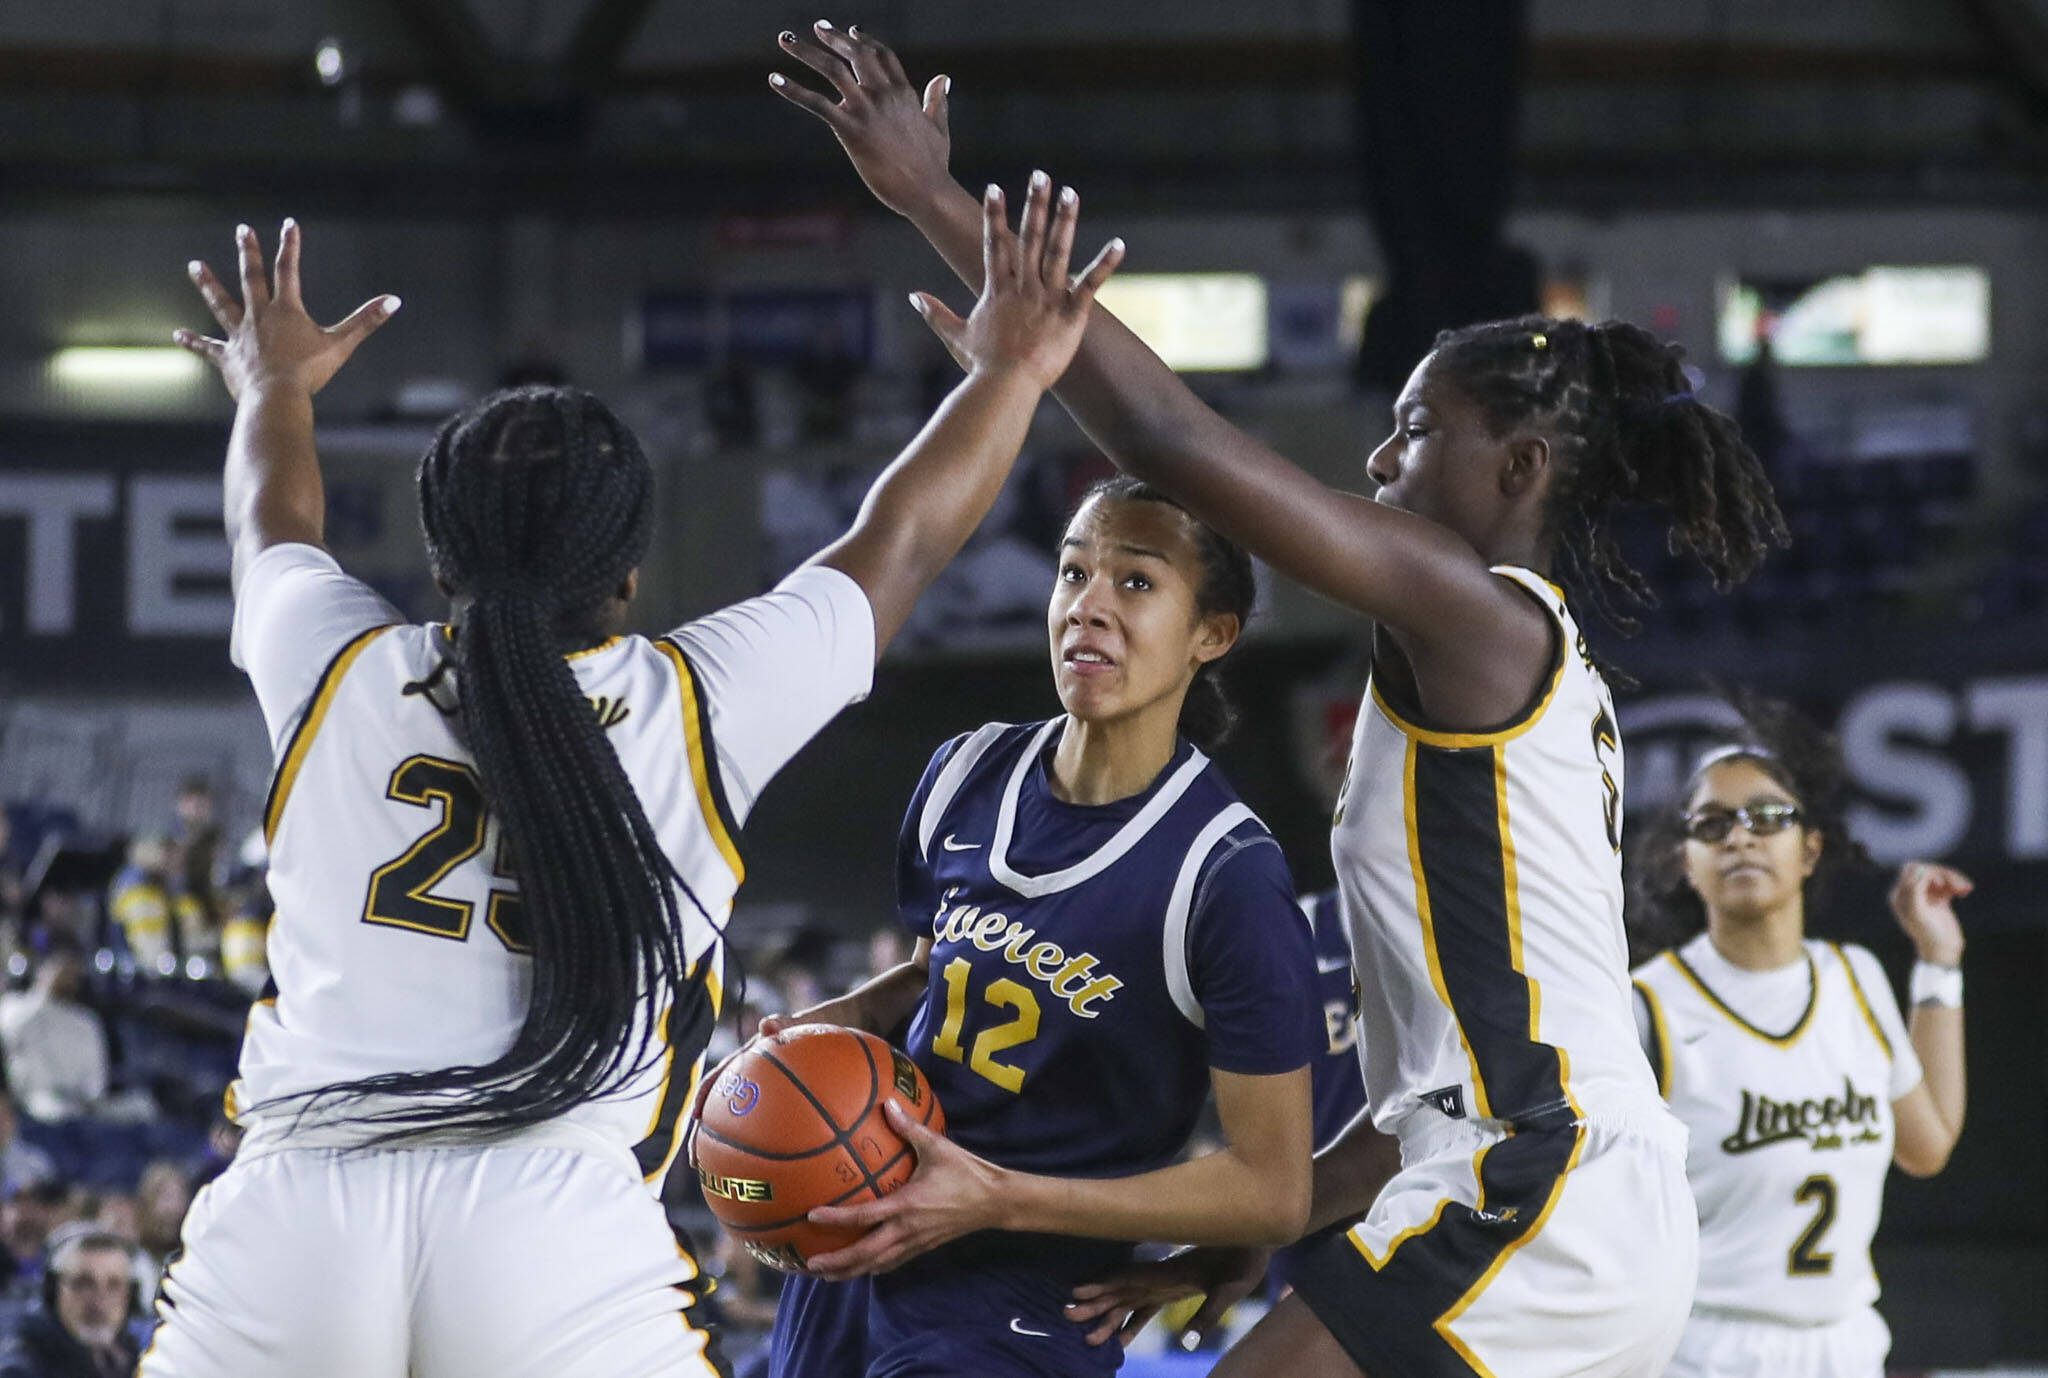 Everett’s Alana Washington (12) moves with the ball during a 3A girls game in the Hardwood Classic between Everett and Lincoln at the Tacoma Dome in Tacoma, Washington on Wednesday, March 1, 2023. Everett fell, 43-45. (Annie Barker / The Herald)